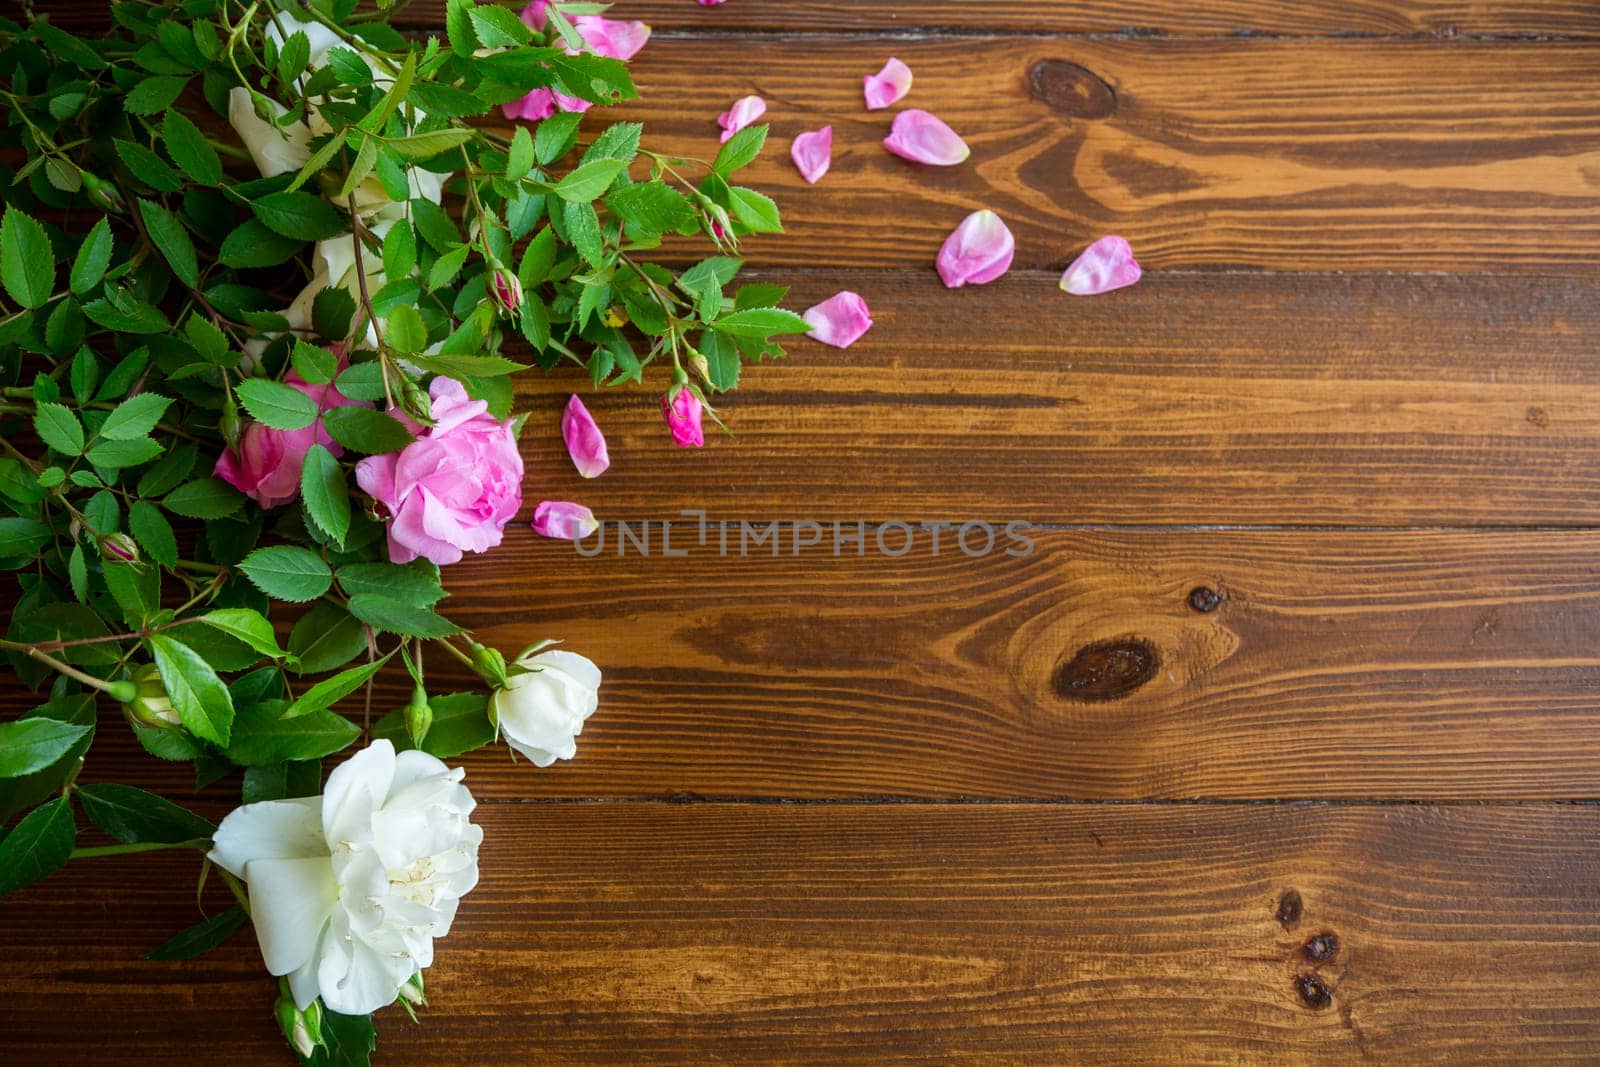 Floral background of pink and white roses on a dark wooden table